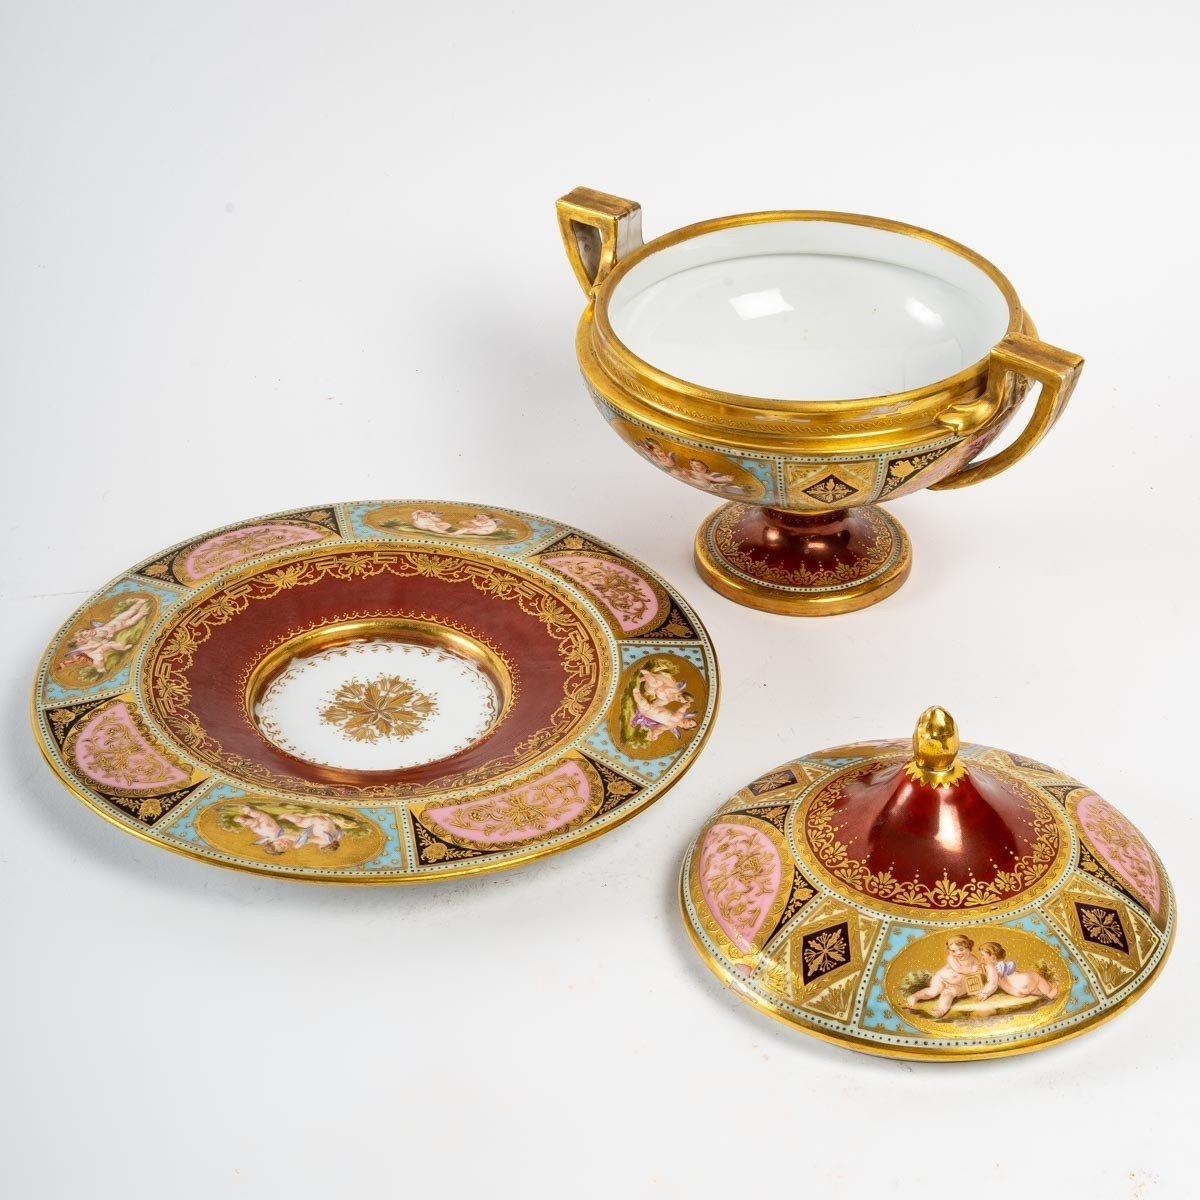 Napoleon III Covered Bowl, Rich Enameled Decoration, 19th Century For Sale